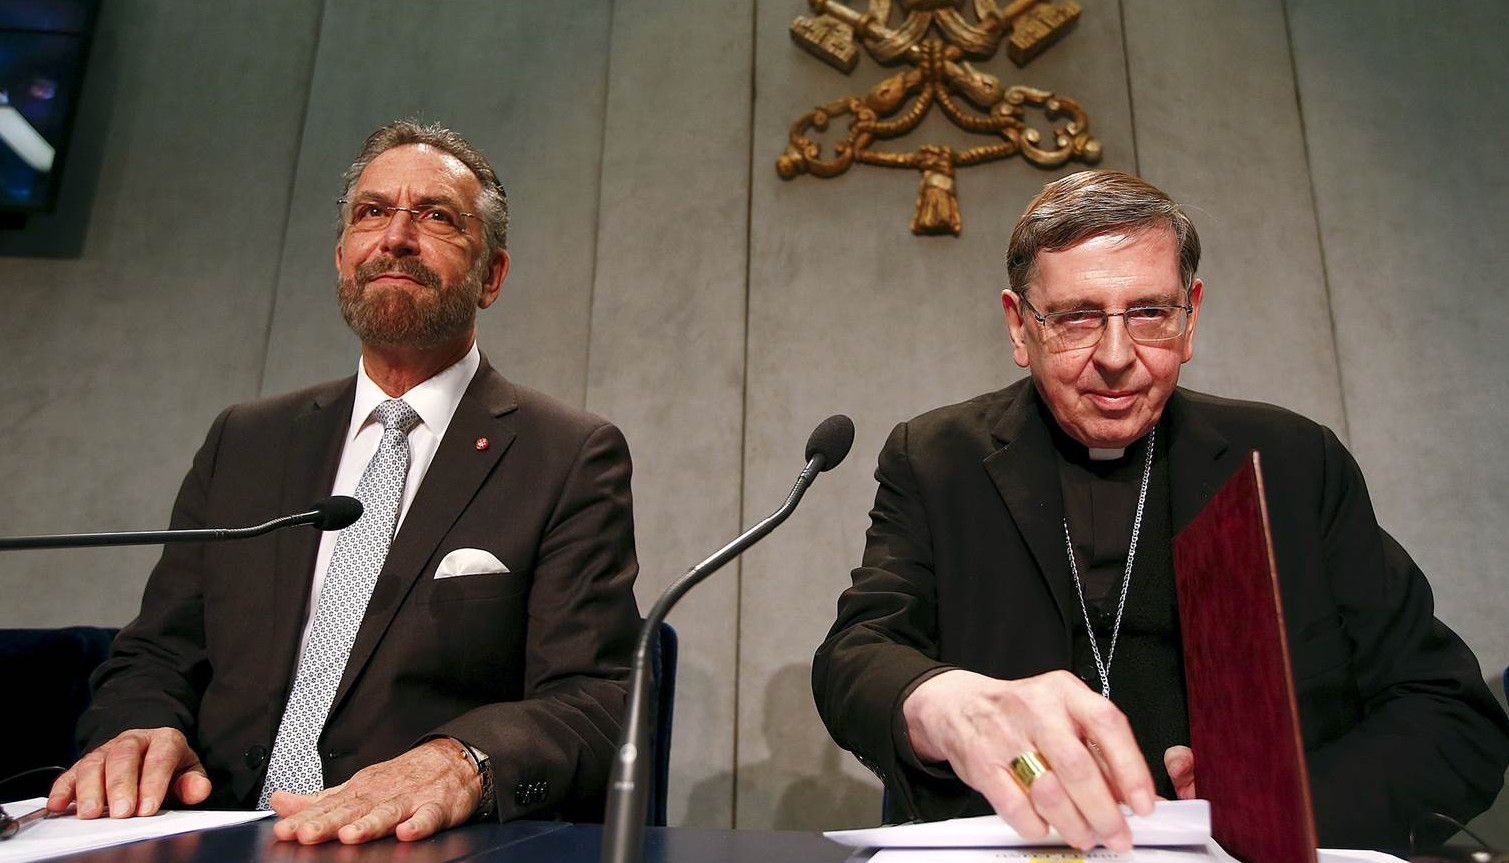 Vatican issues new document on Christian-Jewish dialogue.